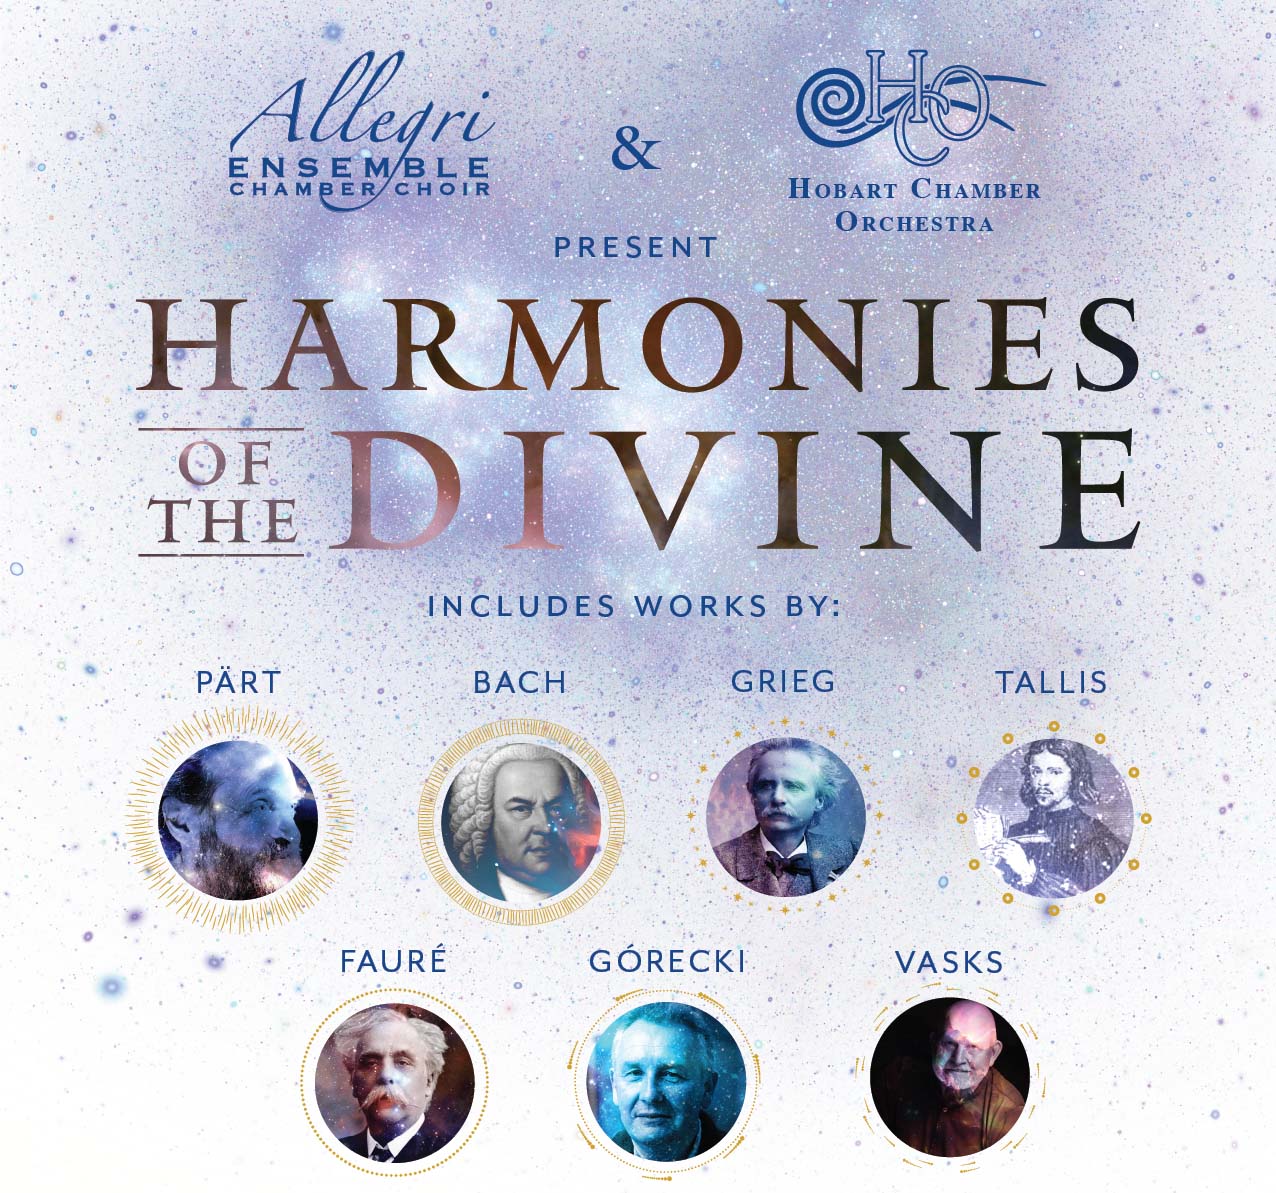 harmonies of the divine a4 v1 (002)